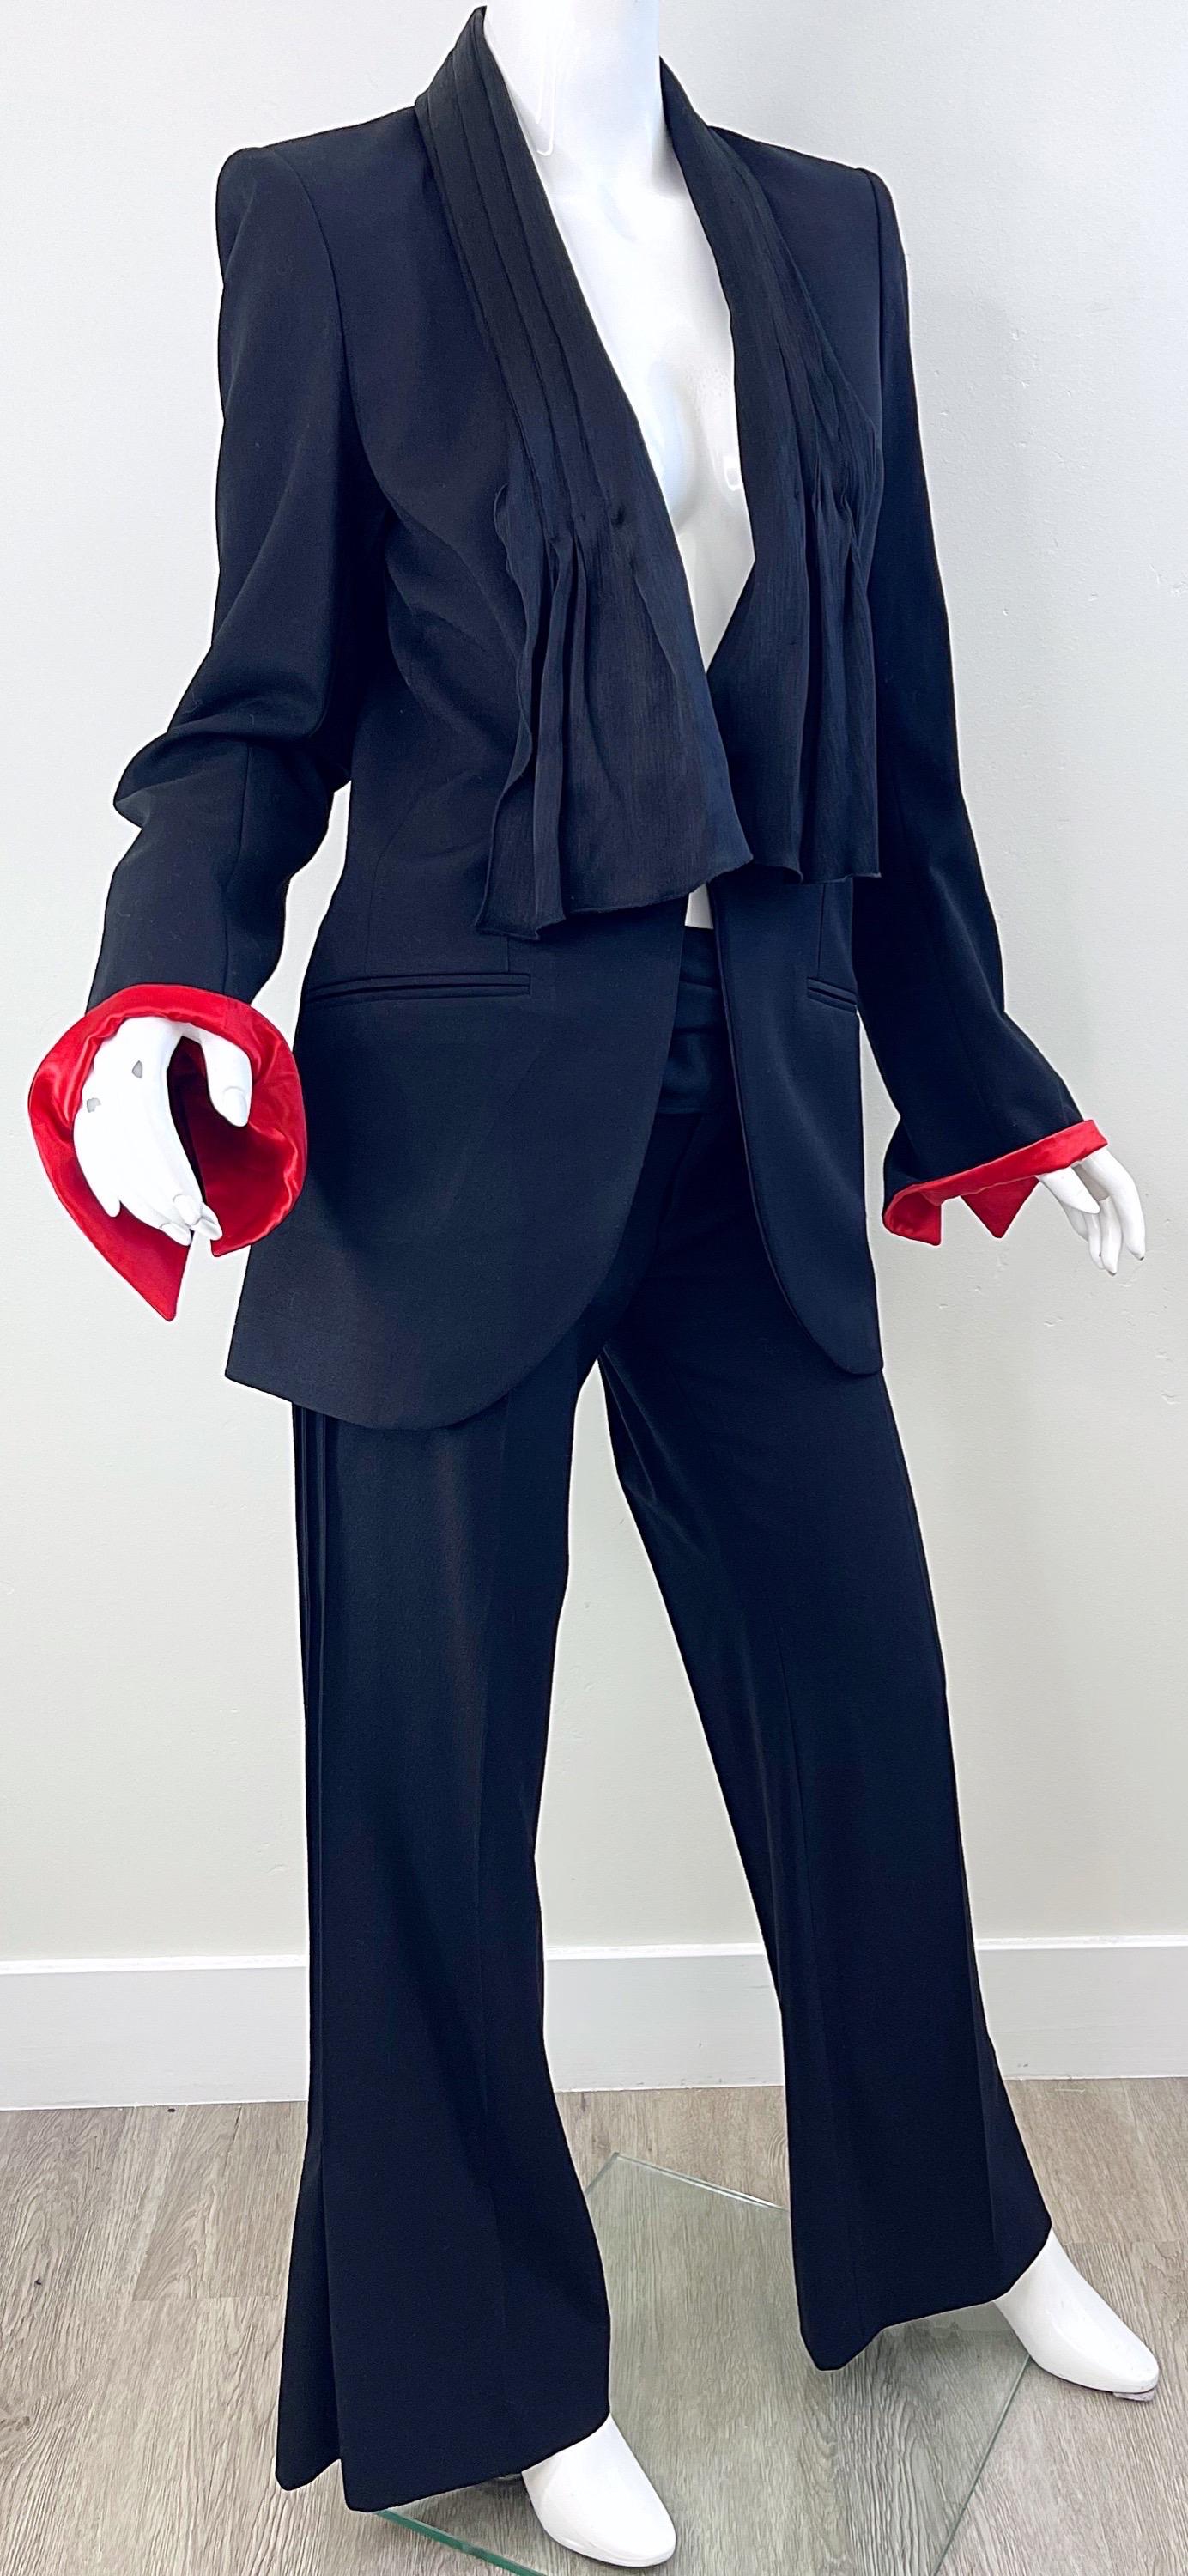 Lloyd Klein 2000s Black and Red Size 8 / 40 Wide Flare Leg Y2K Jacket Pant Suit  For Sale 7